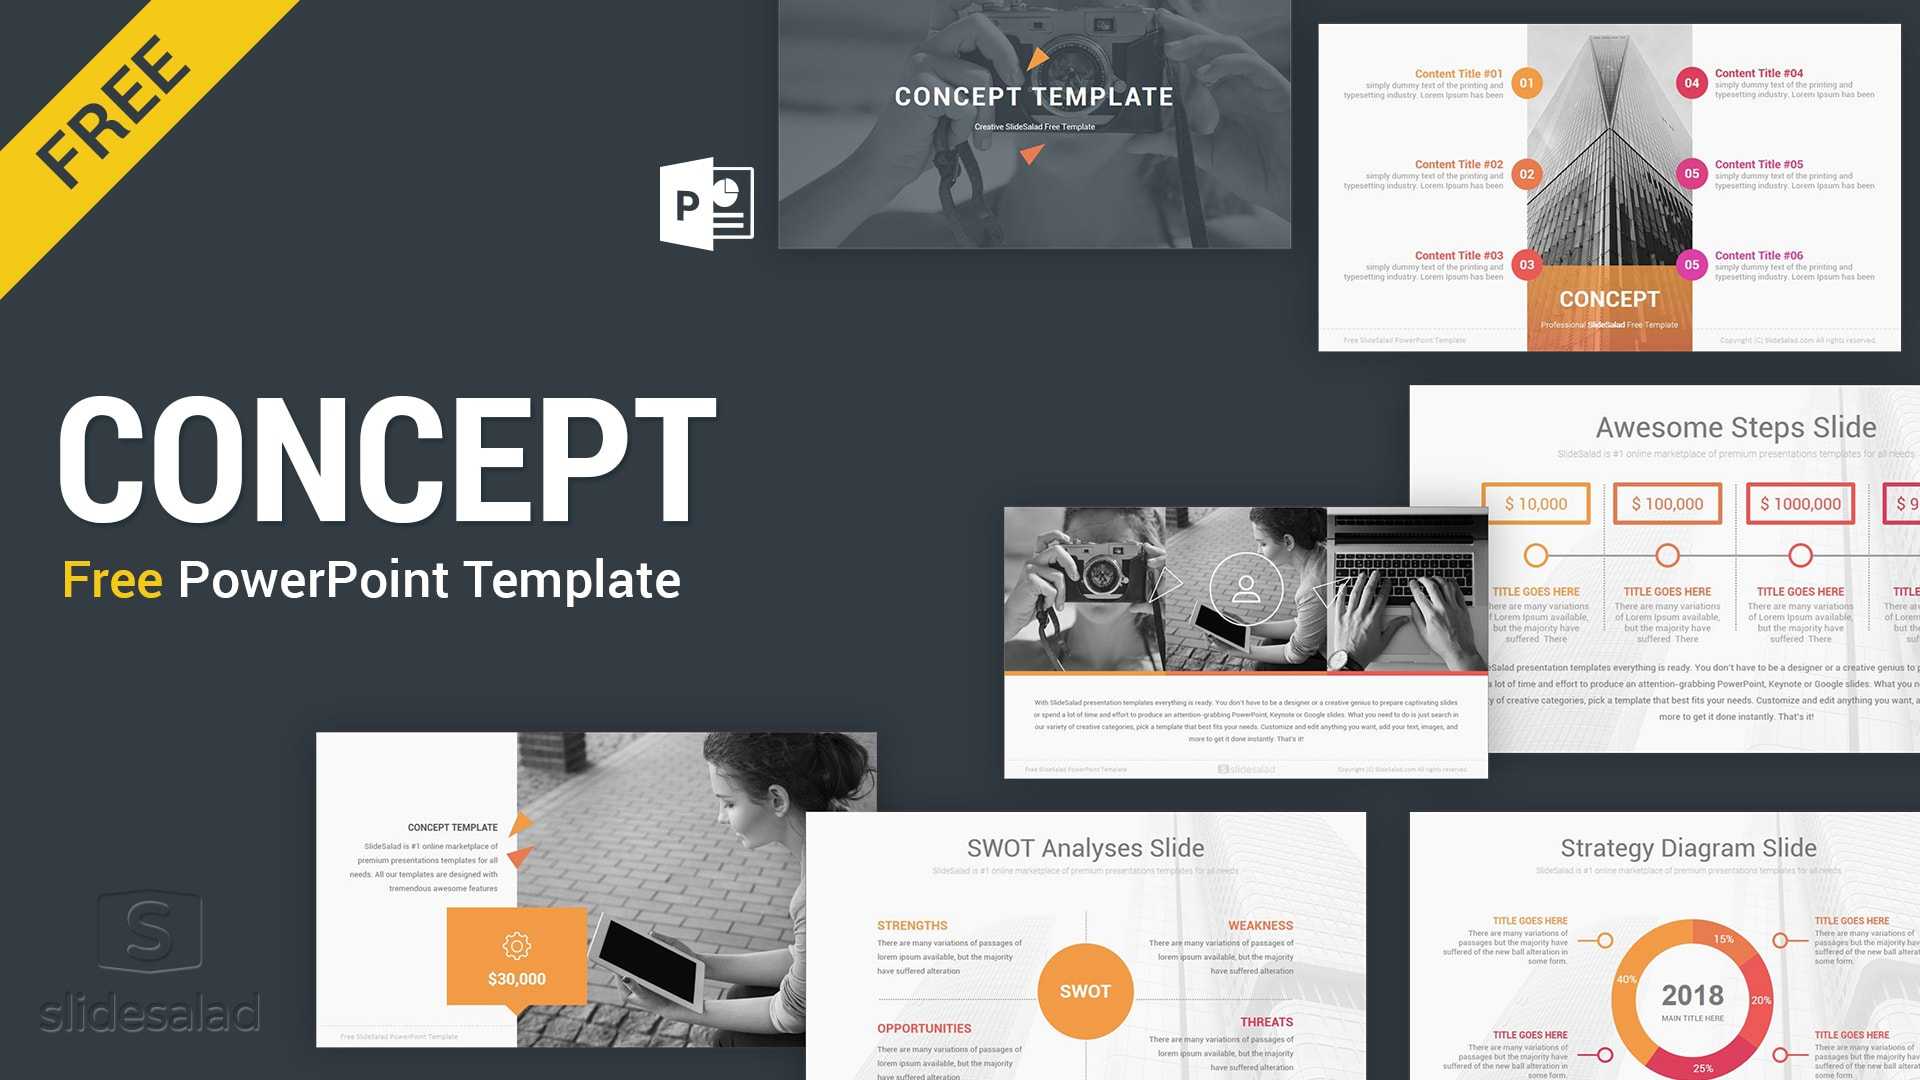 Presentation Templates For Powerpoint Free Download Business Throughout Powerpoint Slides Design Templates For Free